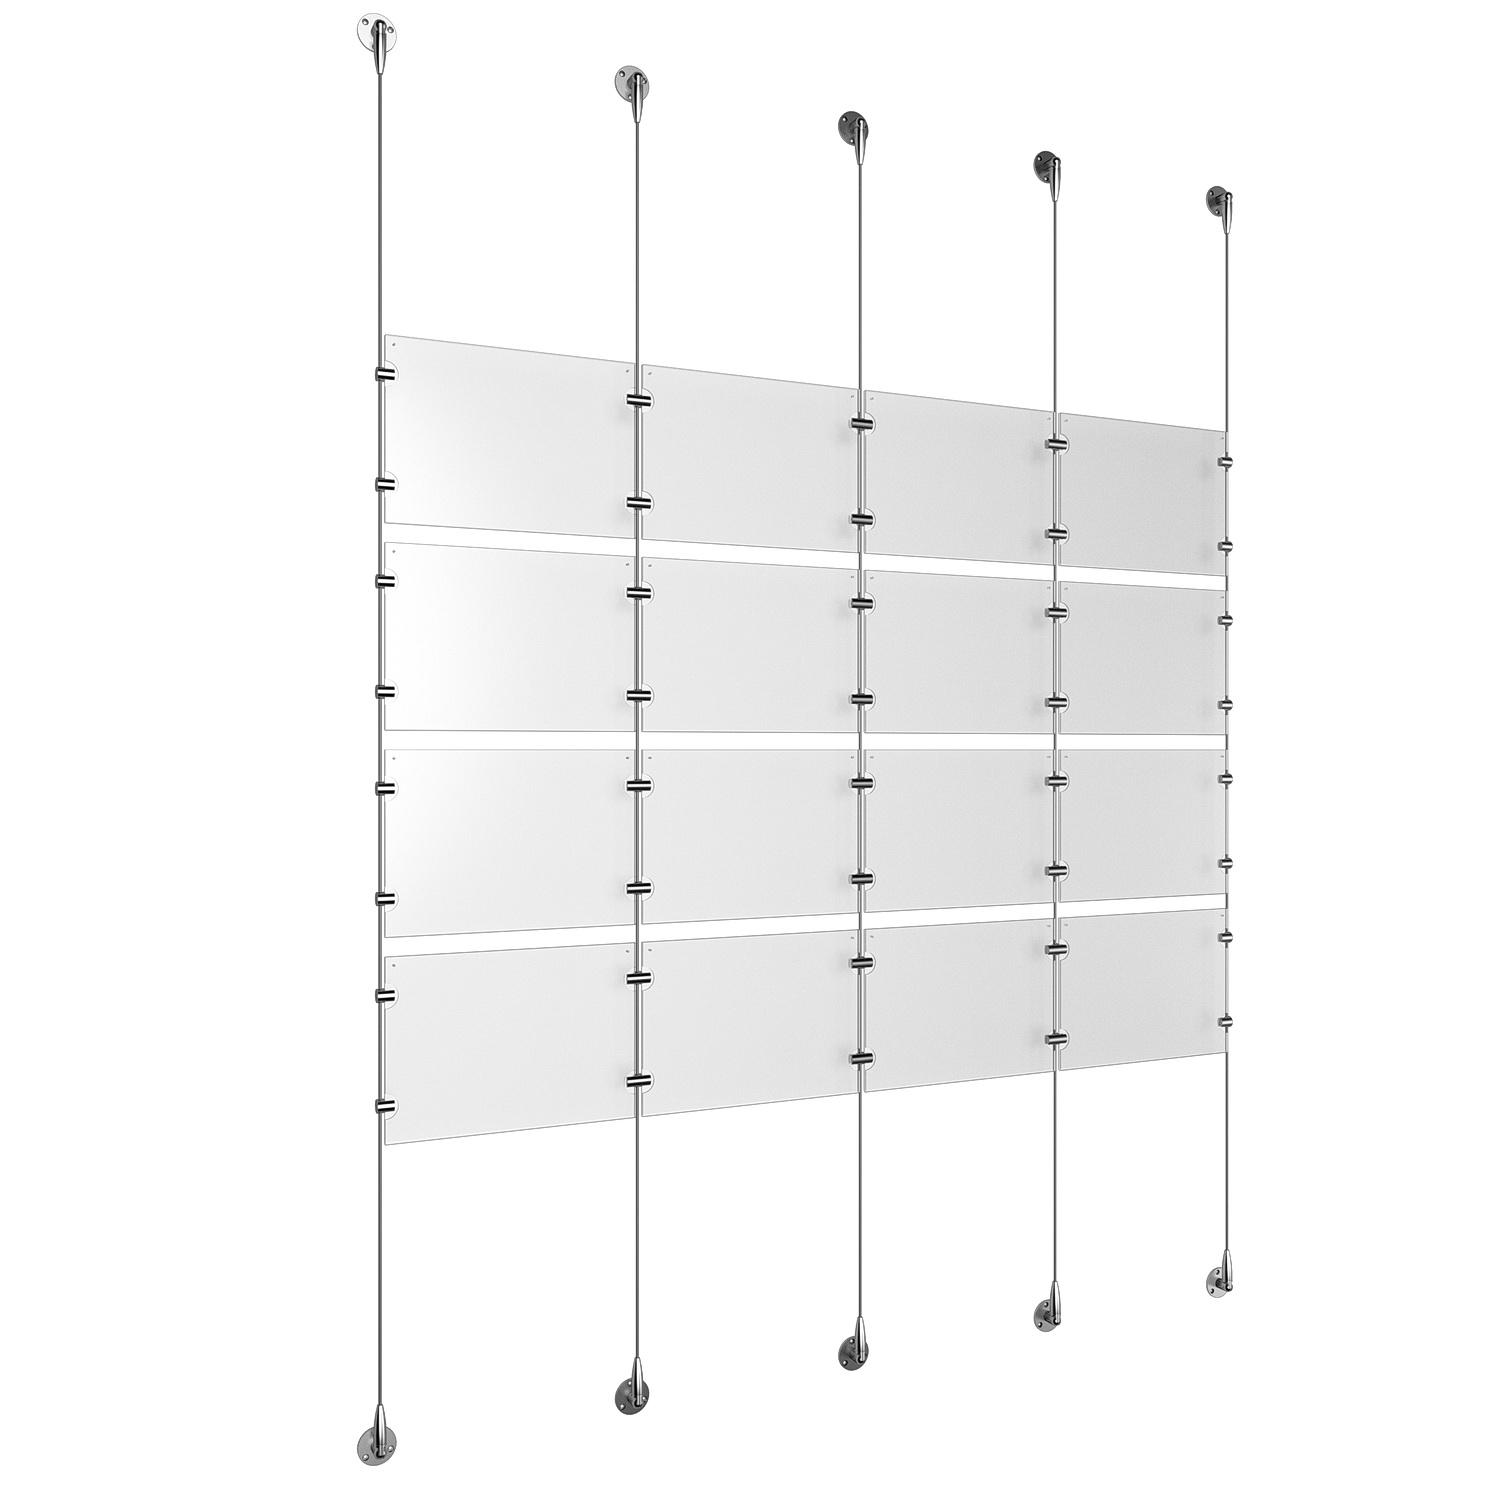 (16) 11'' Width x 8-1/2'' Height Clear Acrylic Frame & (5) Stainless Steel Satin Brushed Adjustable Angle Signature 1/8'' Cable Systems with (16) Single-Sided Panel Grippers (24) Double-Sided Panel Grippers